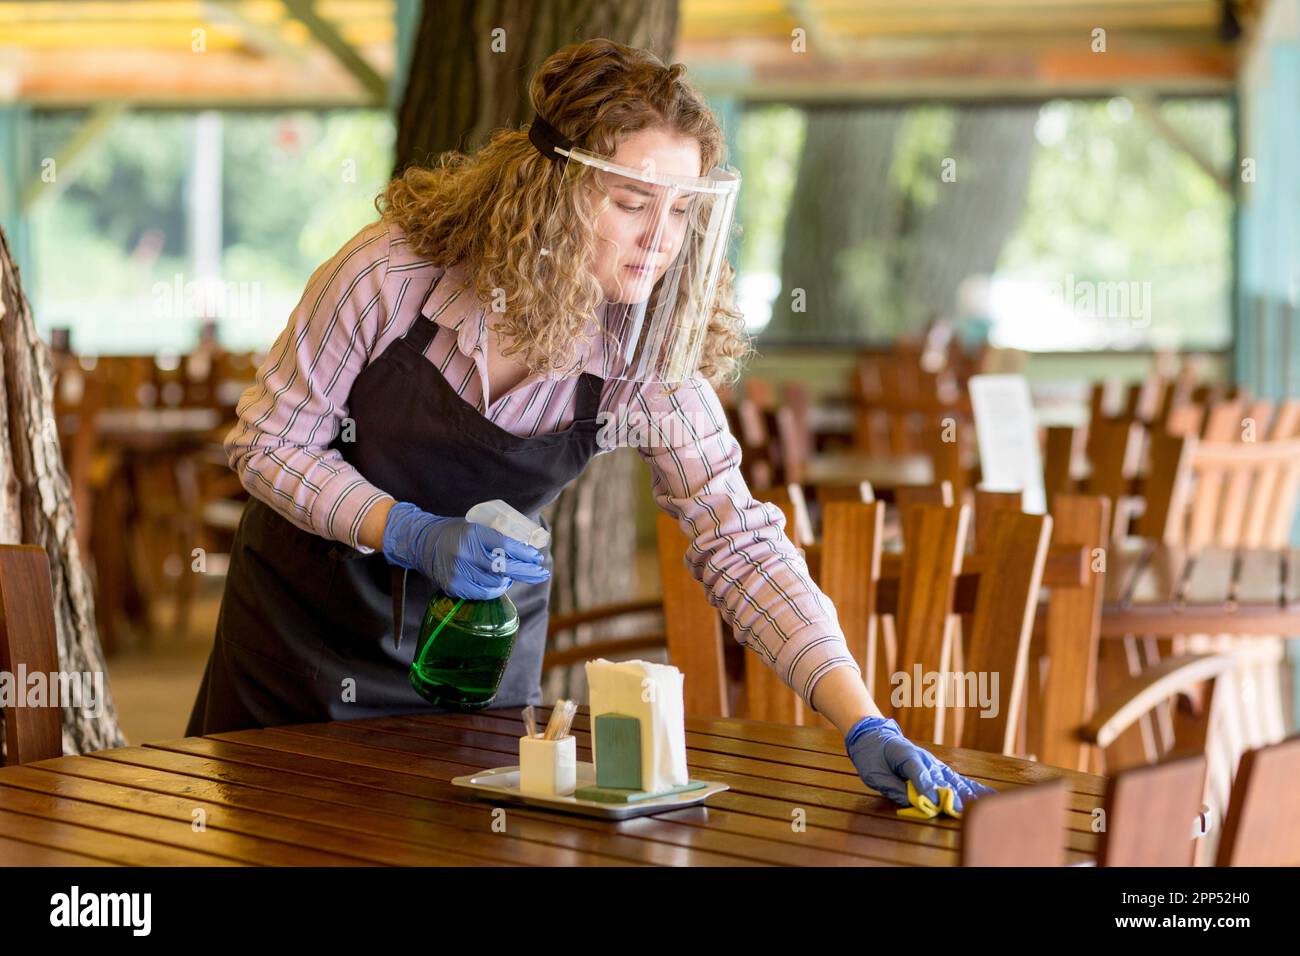 Woman with face protection cleaning tables Stock Photo